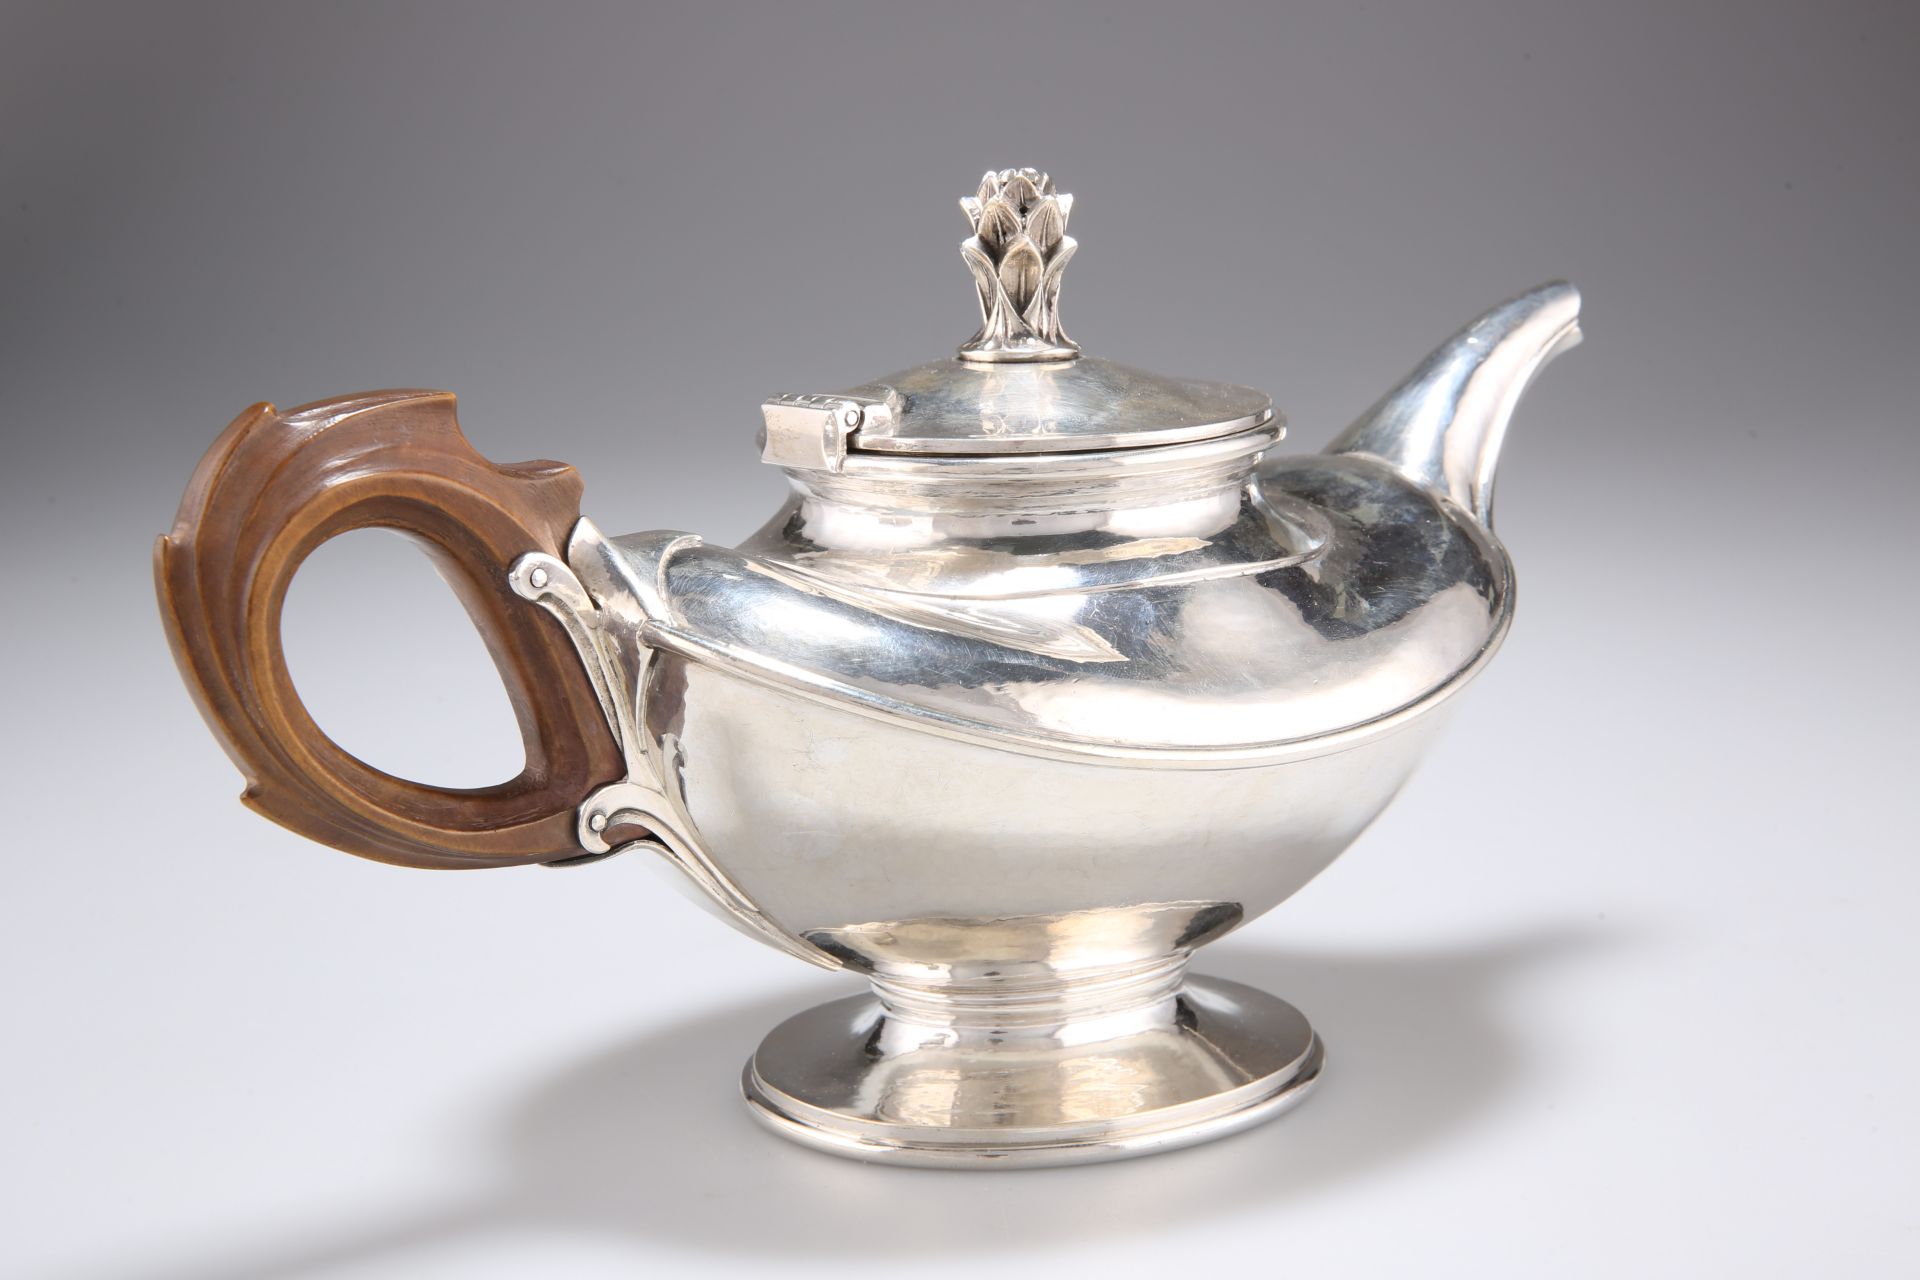 OMAR RAMSDEN (1873-1939), AN ARTS AND CRAFTS SILVER TEAPOT, - Image 2 of 3